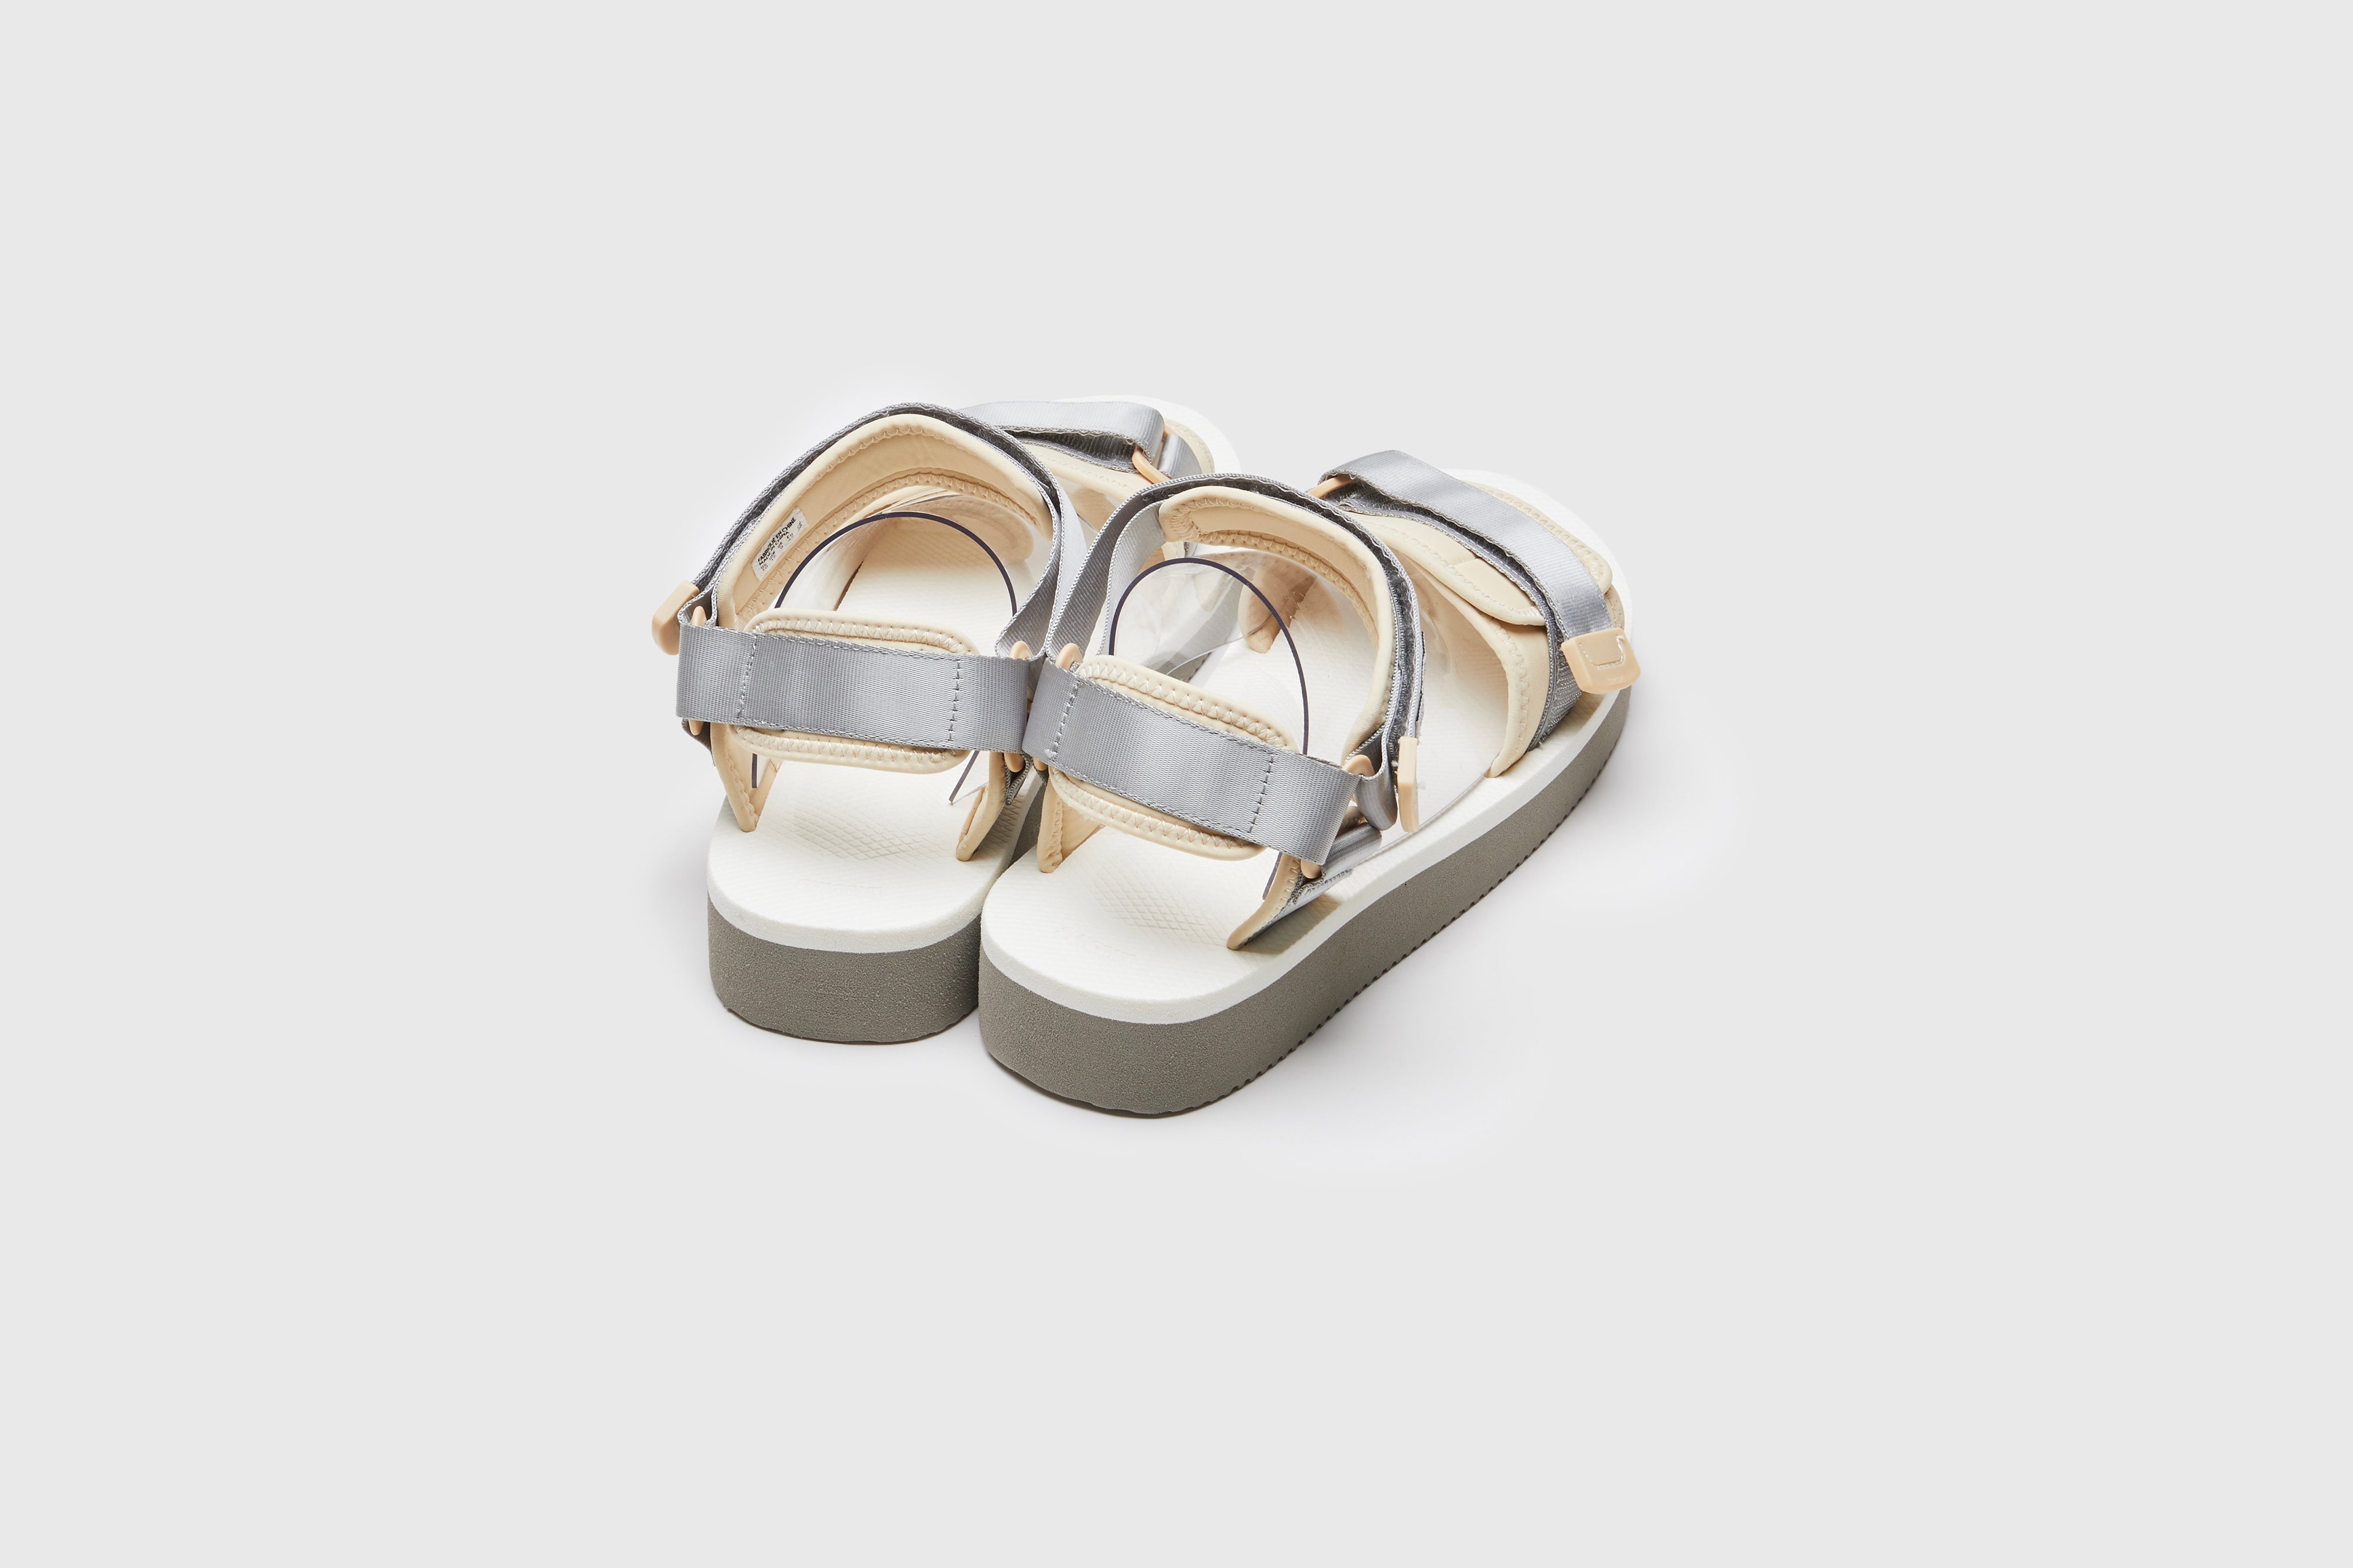 SUICOKE CEL-PO sandals with gray &amp; white nylon upper, gray &amp; white midsole and sole, strap and logo patch. From Spring/Summer 2023 collection on eightywingold Web Store, an official partner of SUICOKE. OG-022PO GRAY X WHITE